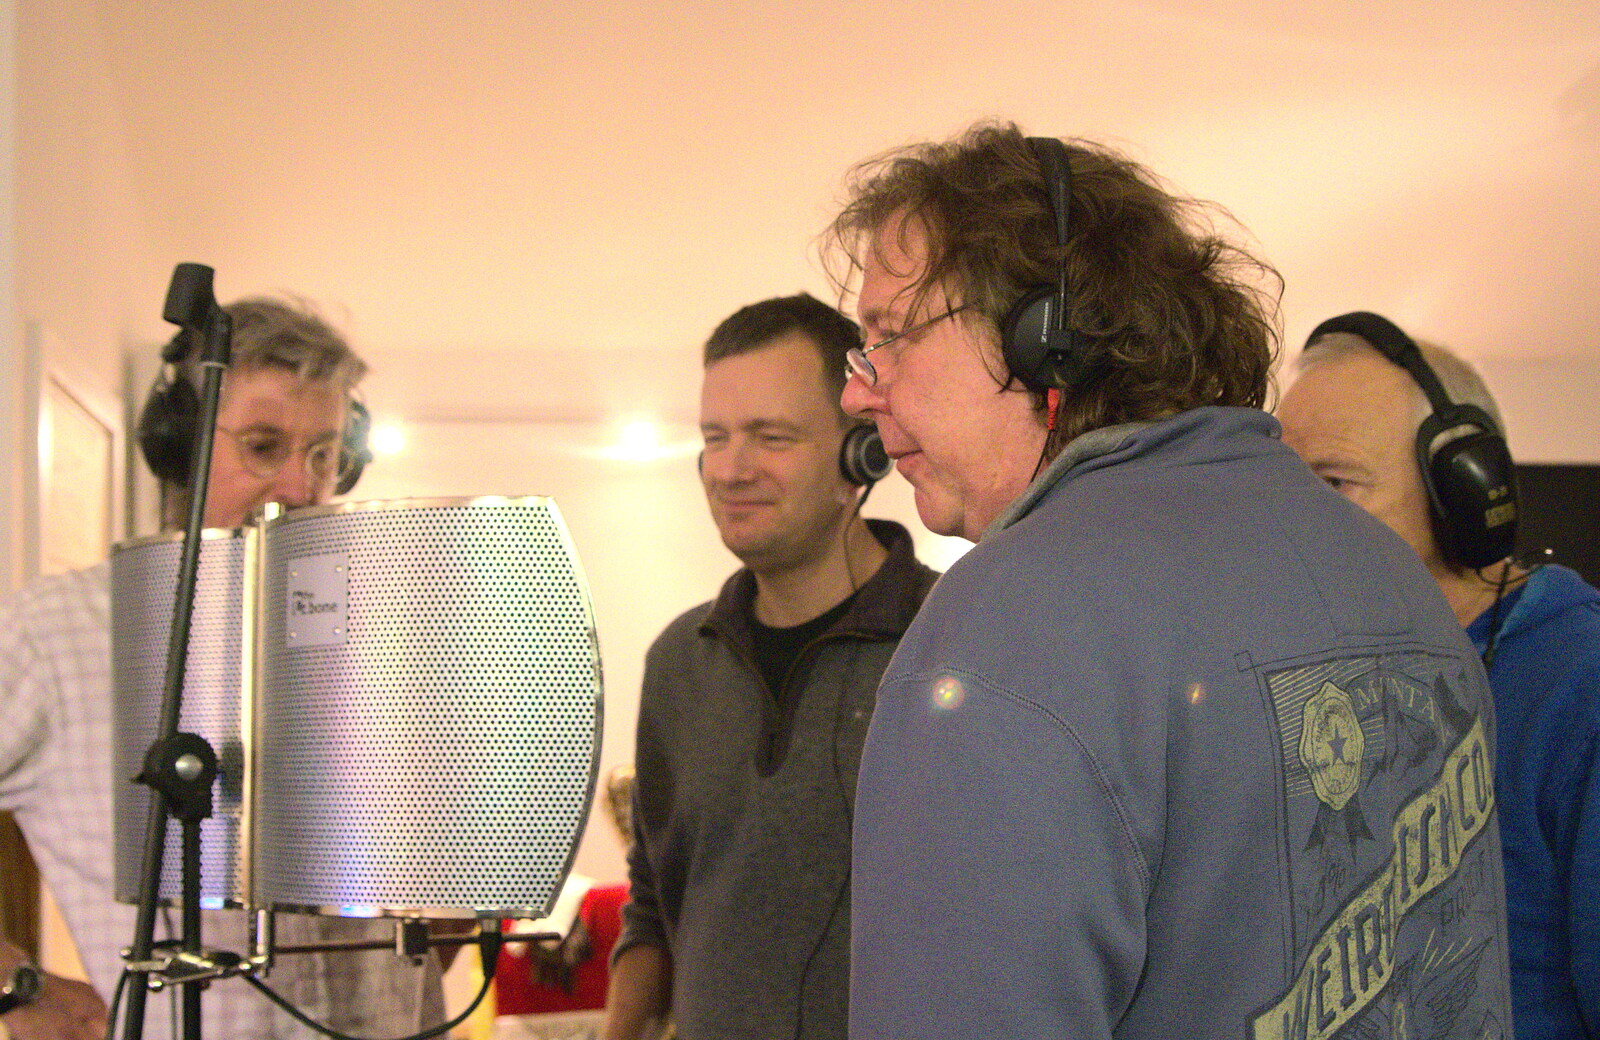 The boys do backing vocals from The BBs do a Recording, Hethel, Norfolk - 18th January 2015